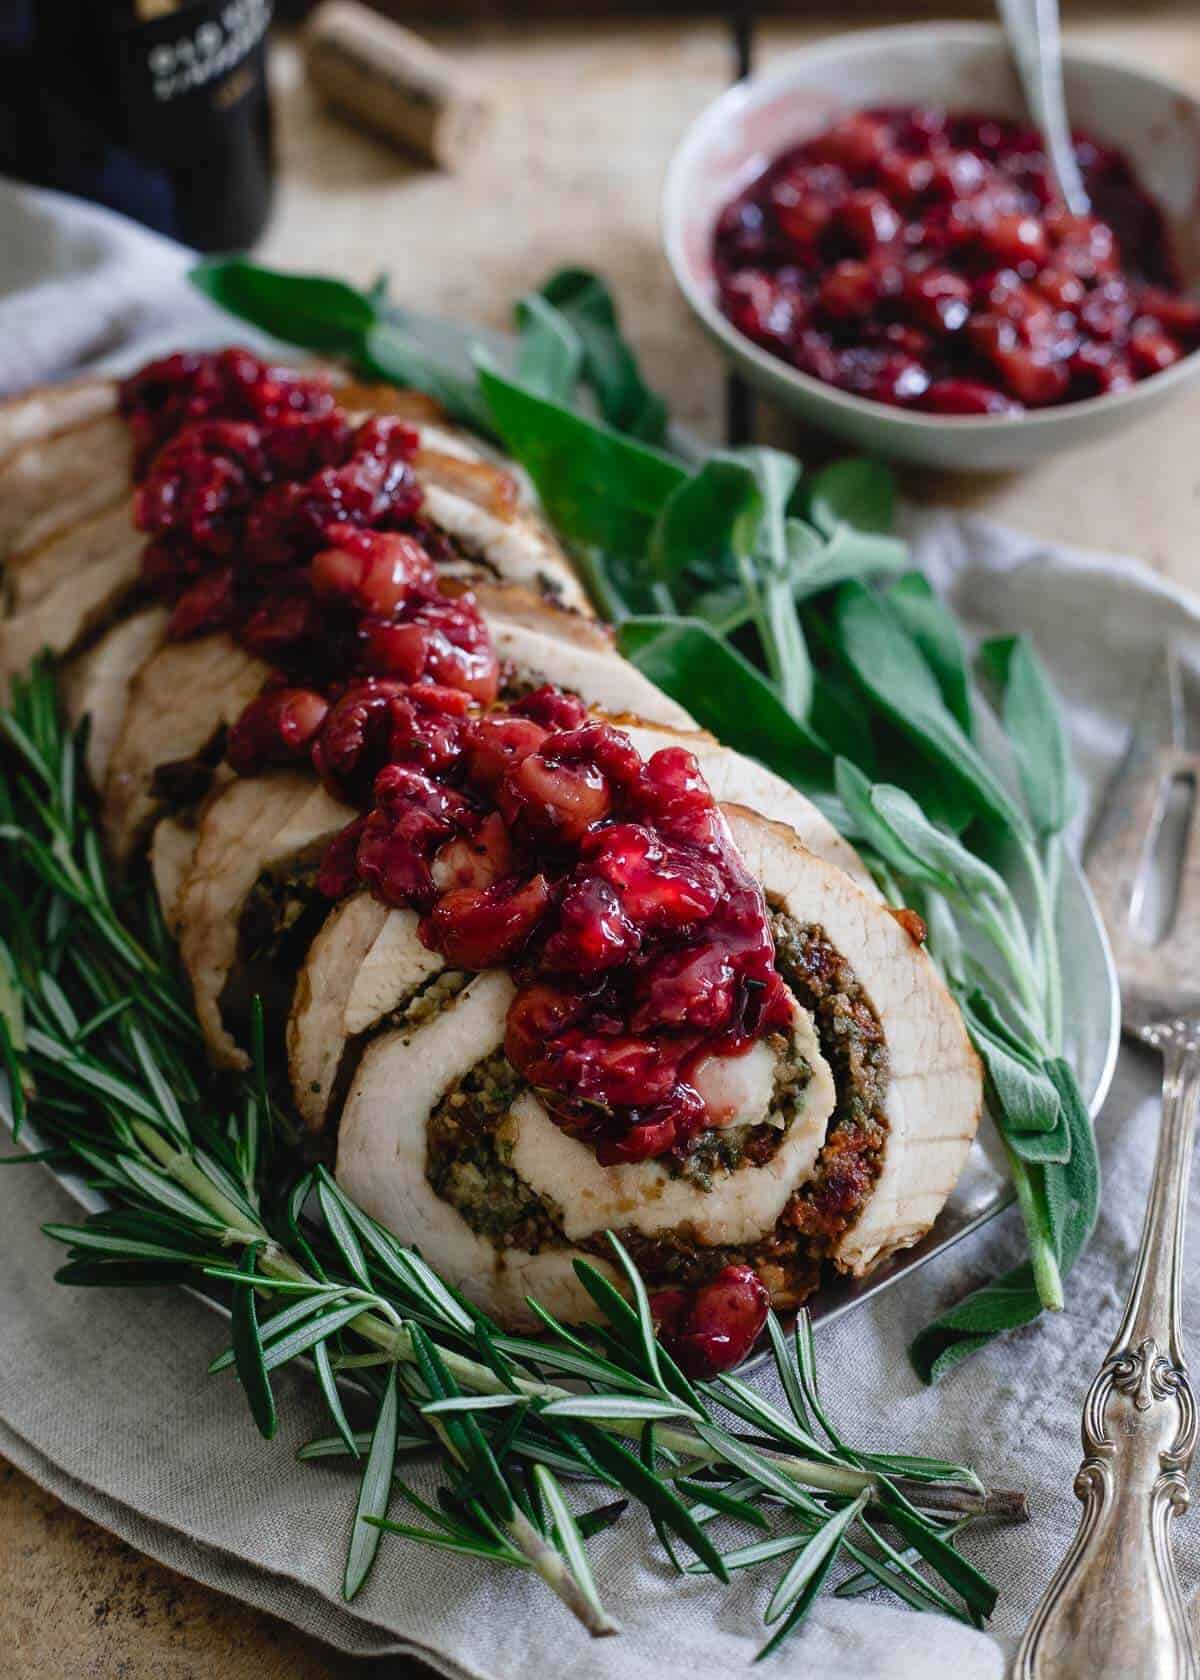 This turkey roulade is stuffed with Montmorency tart cherries, chestnuts and herbs. It's topped with a red wine soaked cherry sauce and makes for a beautiful (and easy!) holiday dish.